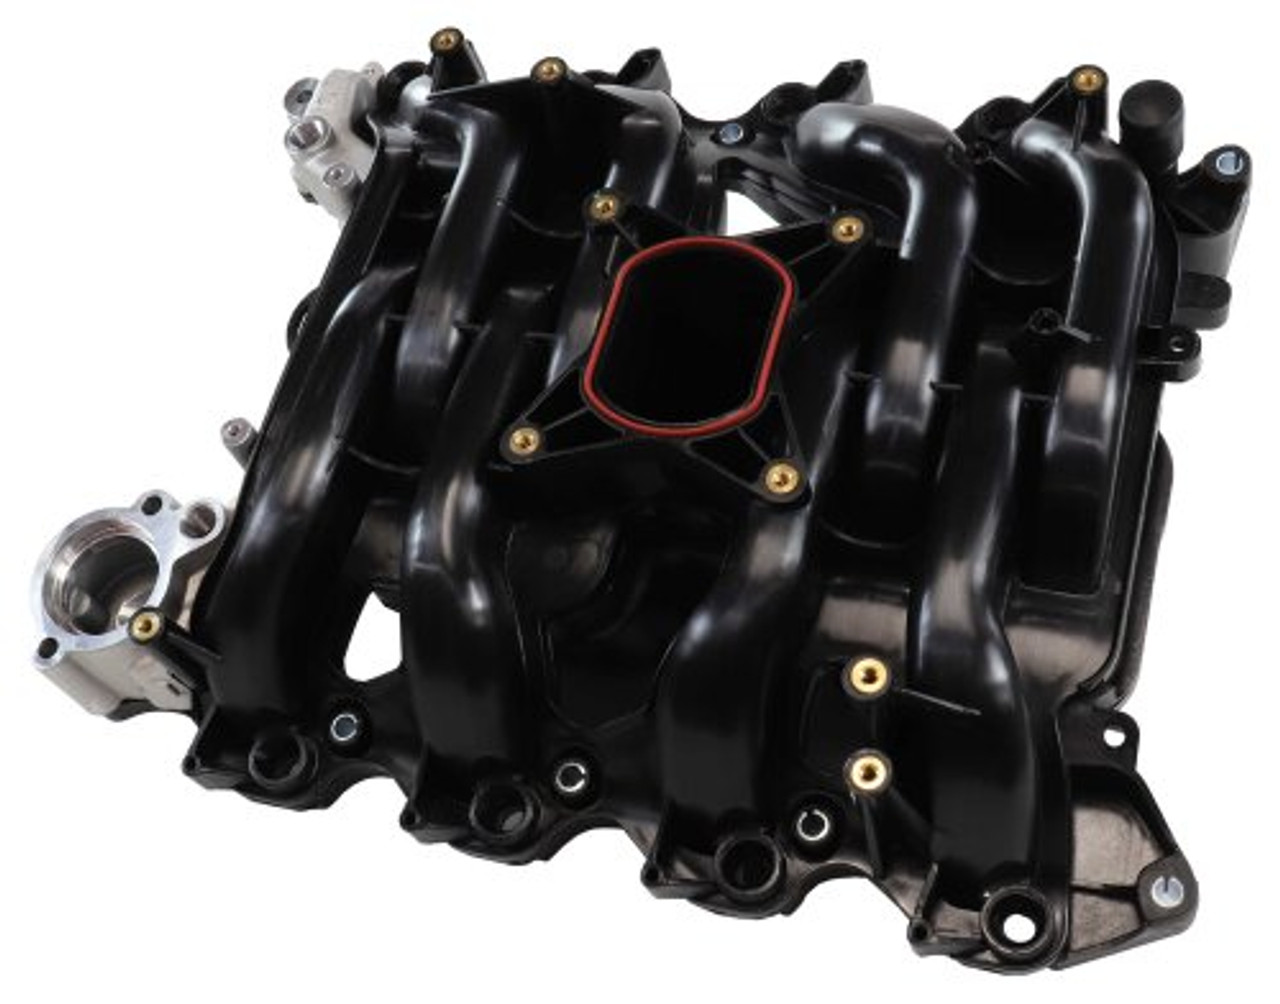 Intake Manifold - 2007 Ford Crown Victoria 4.6L Engine Parts # IMA1000ZE7